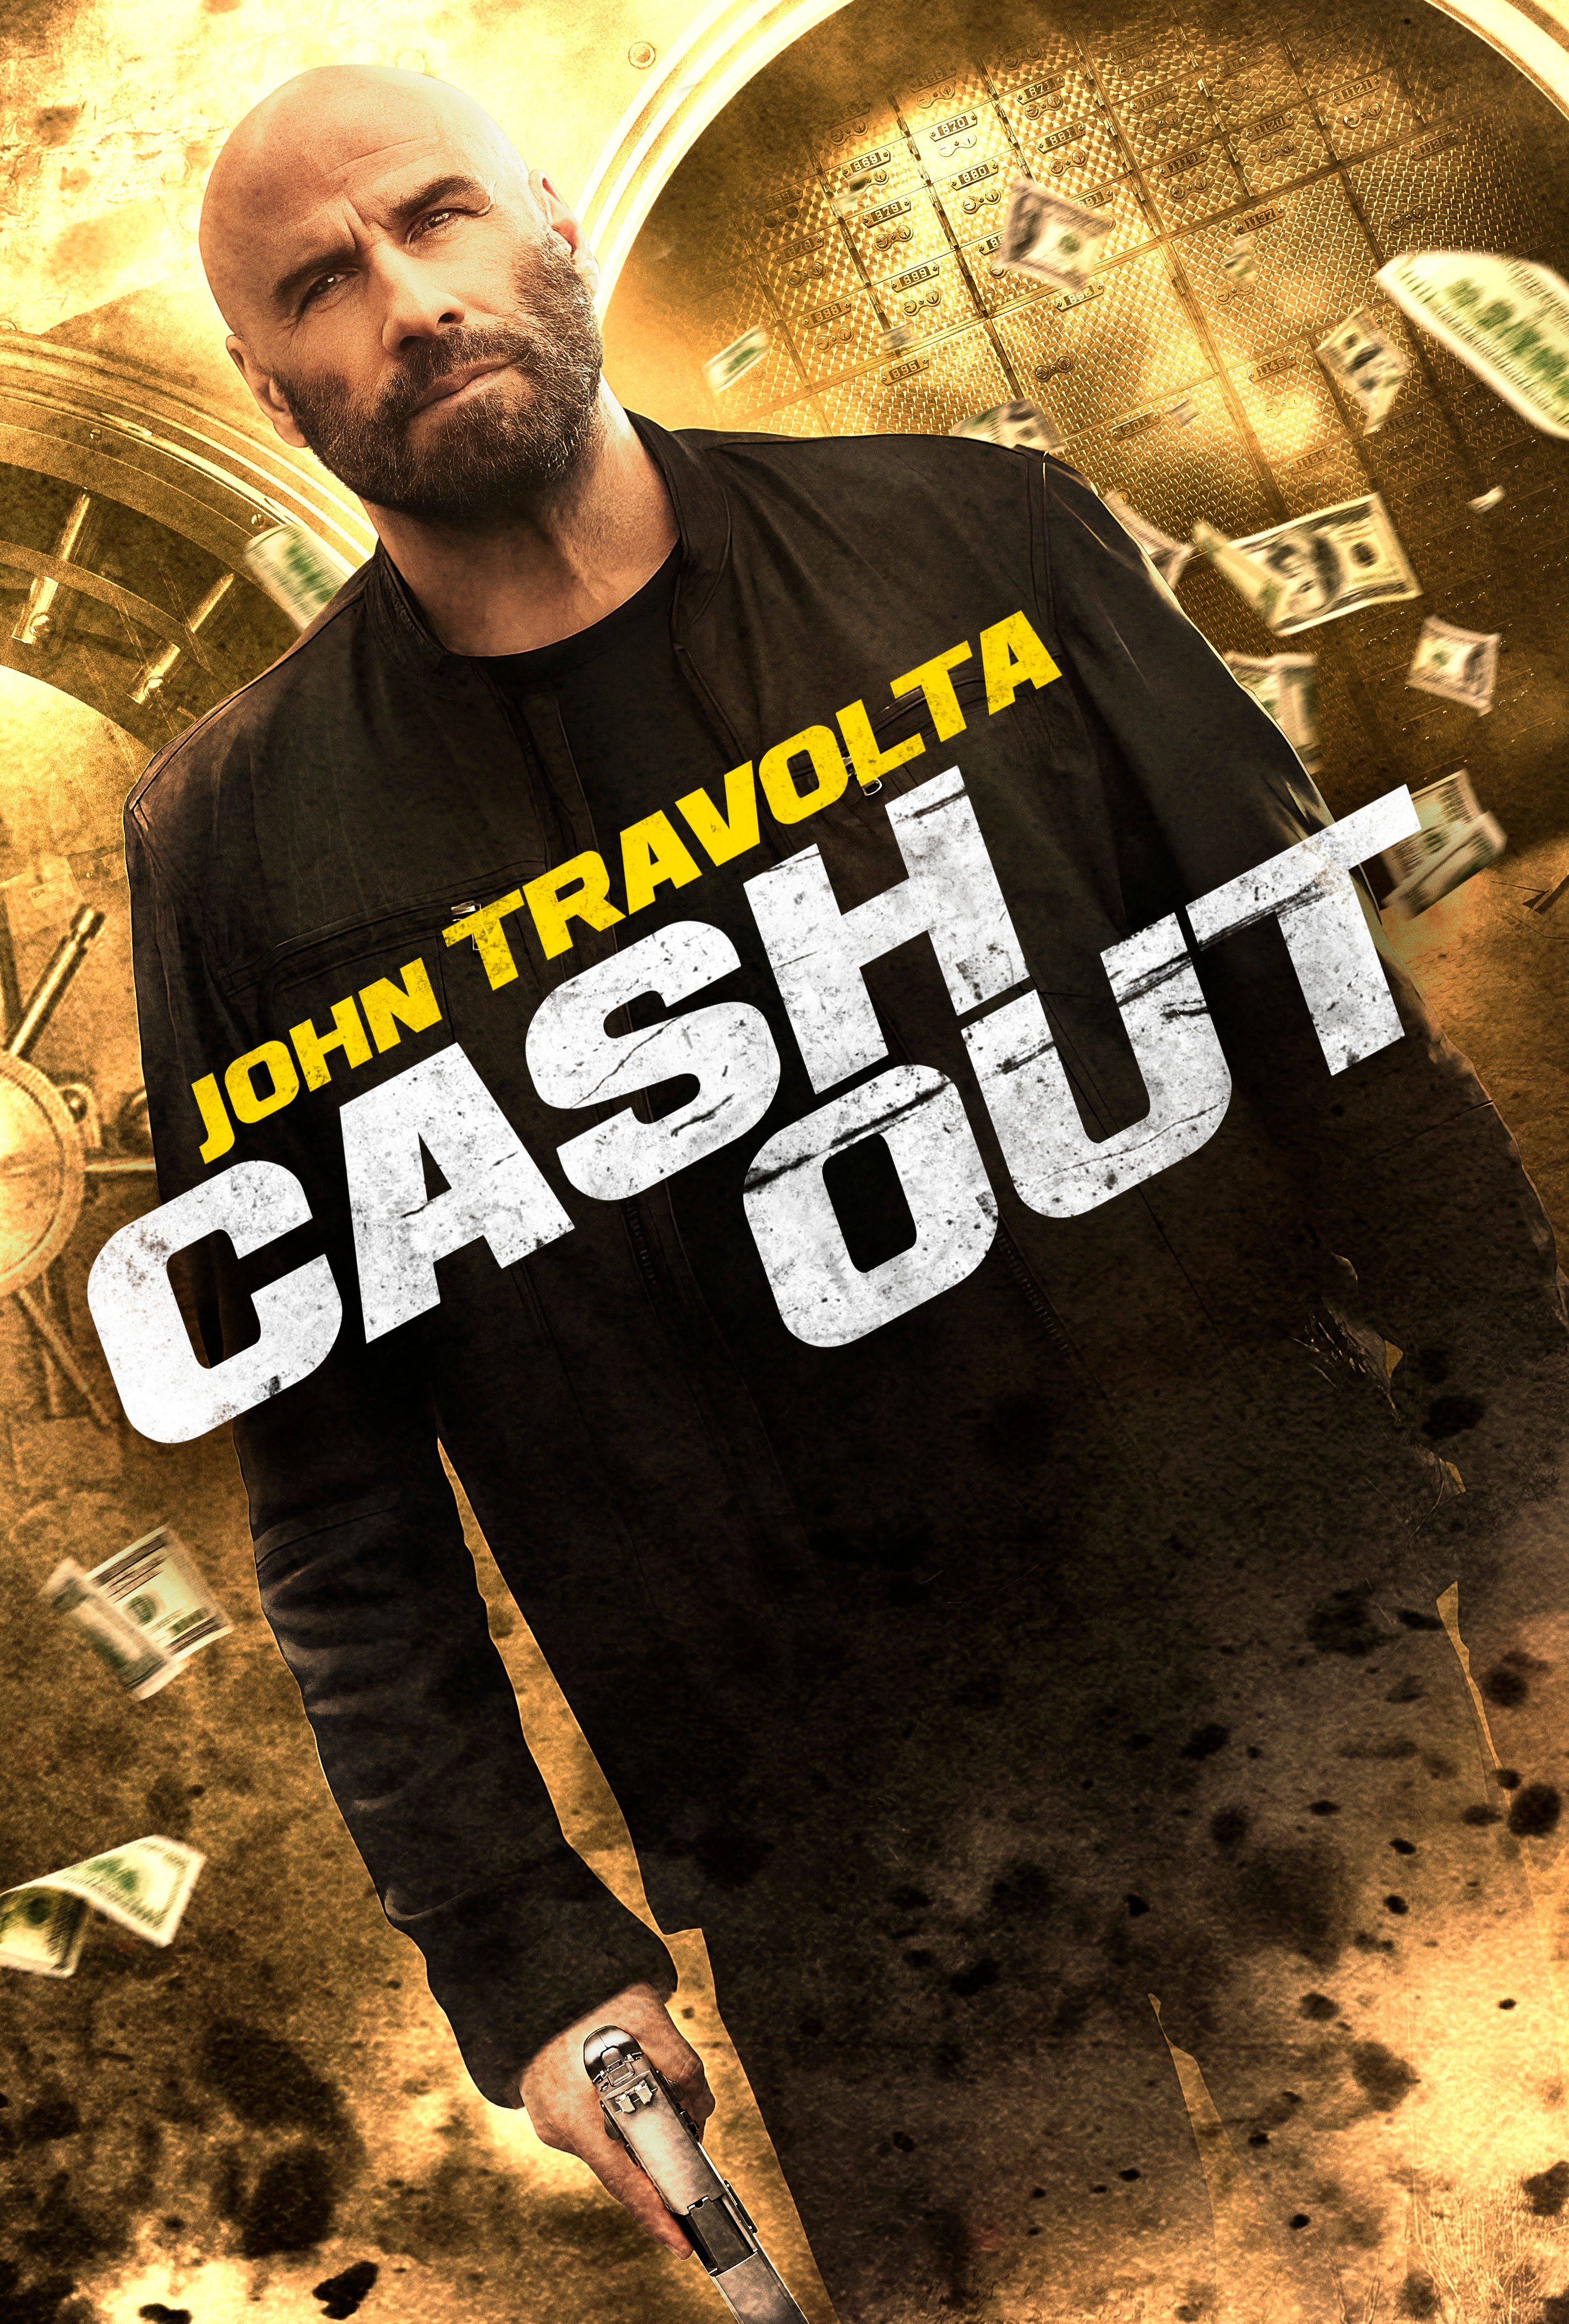 Cash Out Review: John Travolta Negotiates With His Ex-Lover In Funny Action Heist Caper Gone Wrong